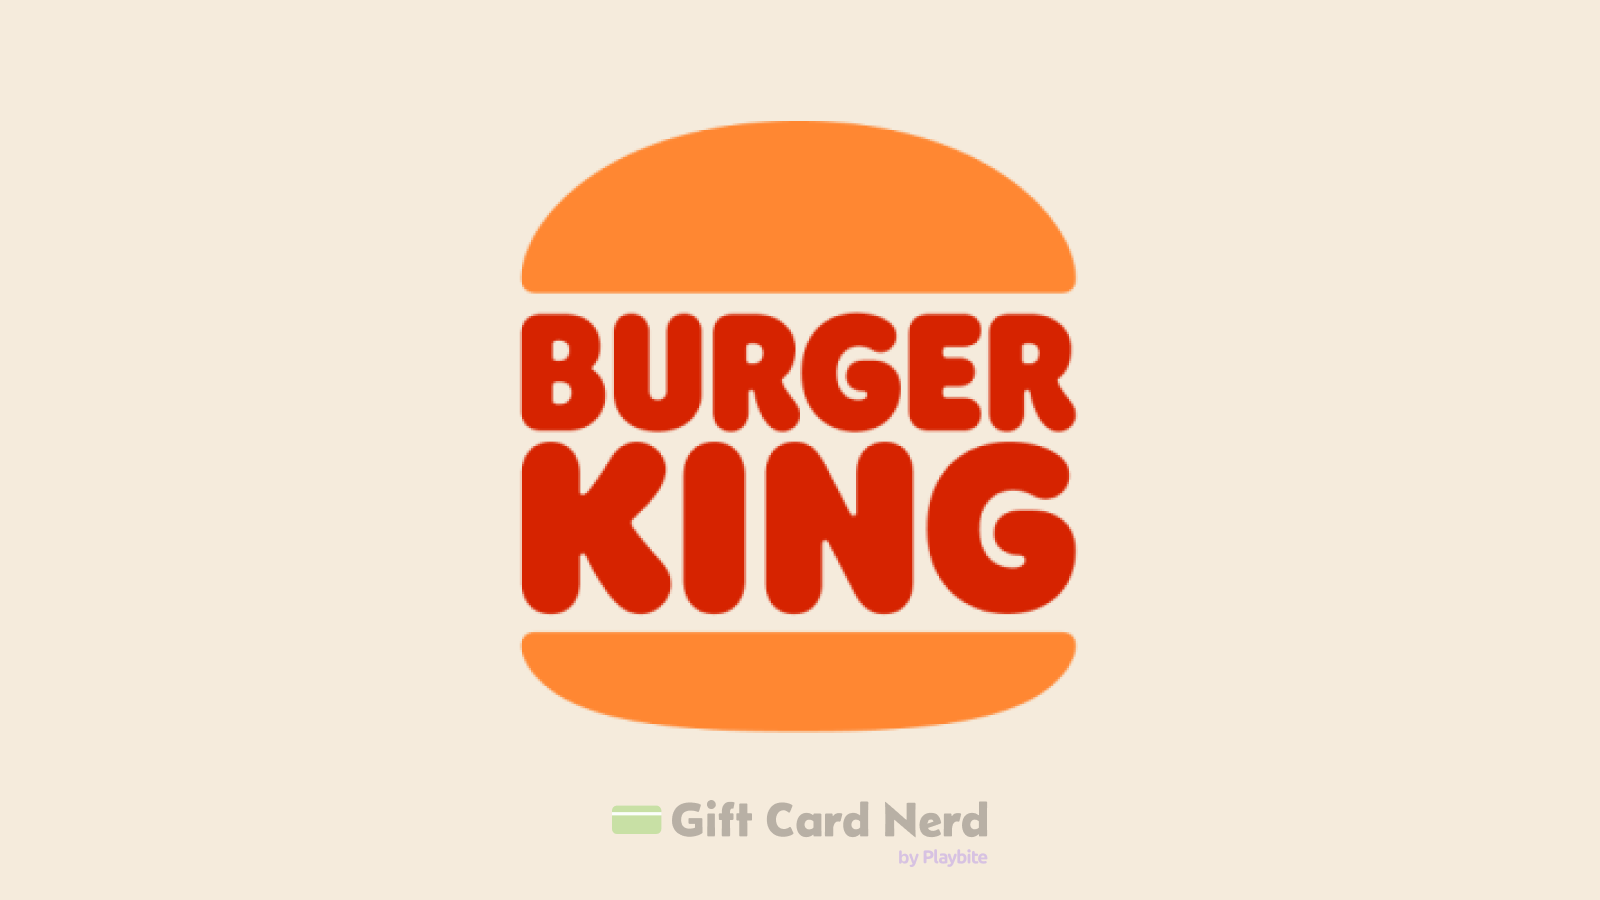 Does CVS Sell Burger King Gift Cards?